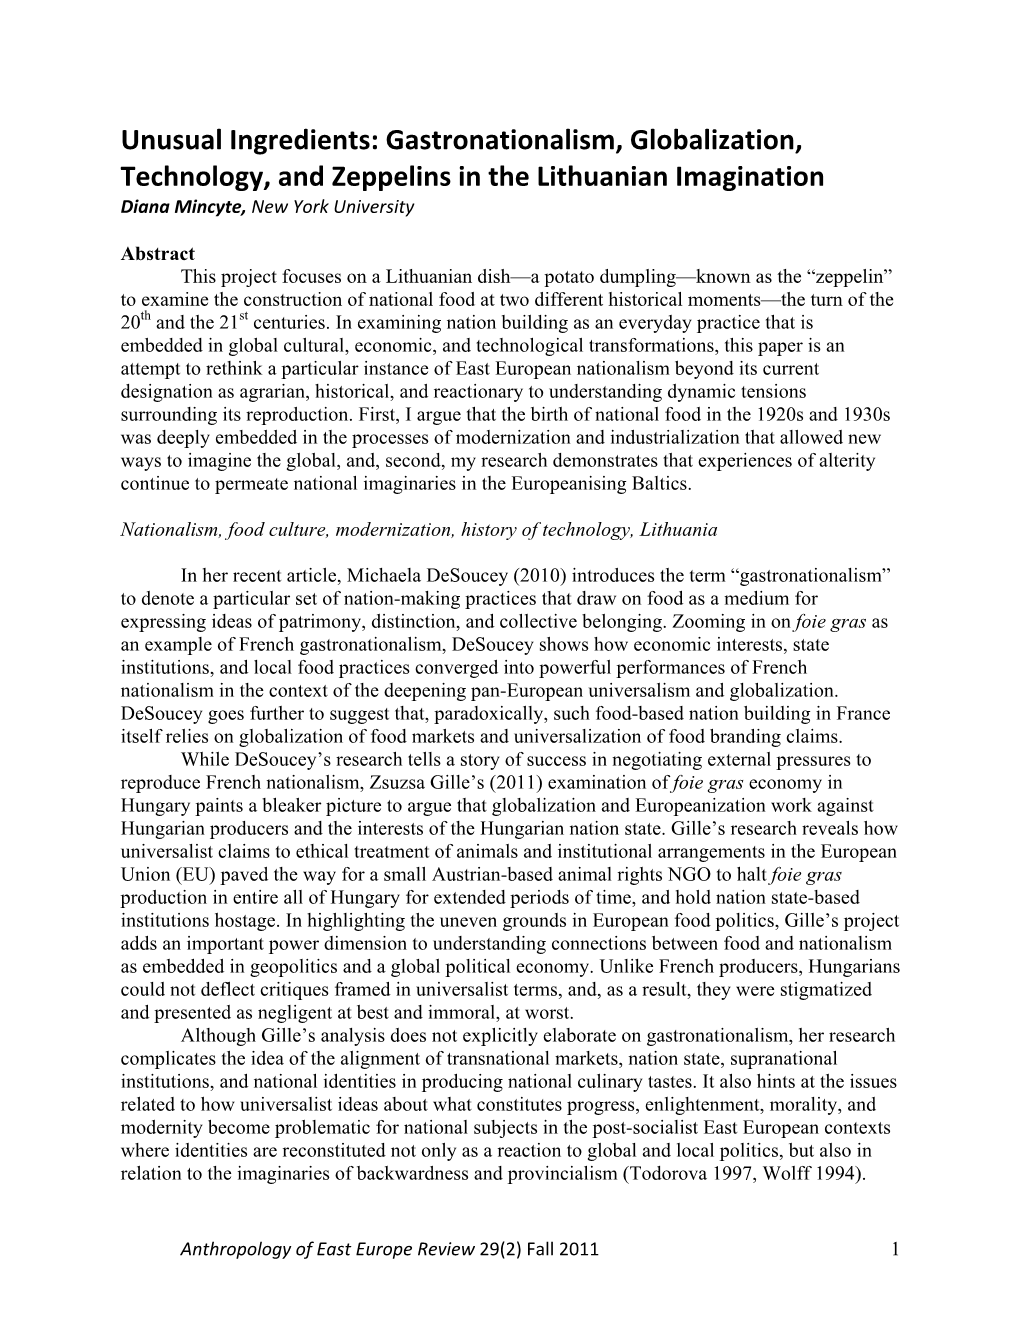 Gastronationalism, Globalization, Technology, and Zeppelins in the Lithuanian Imagination Diana Mincyte, New York University